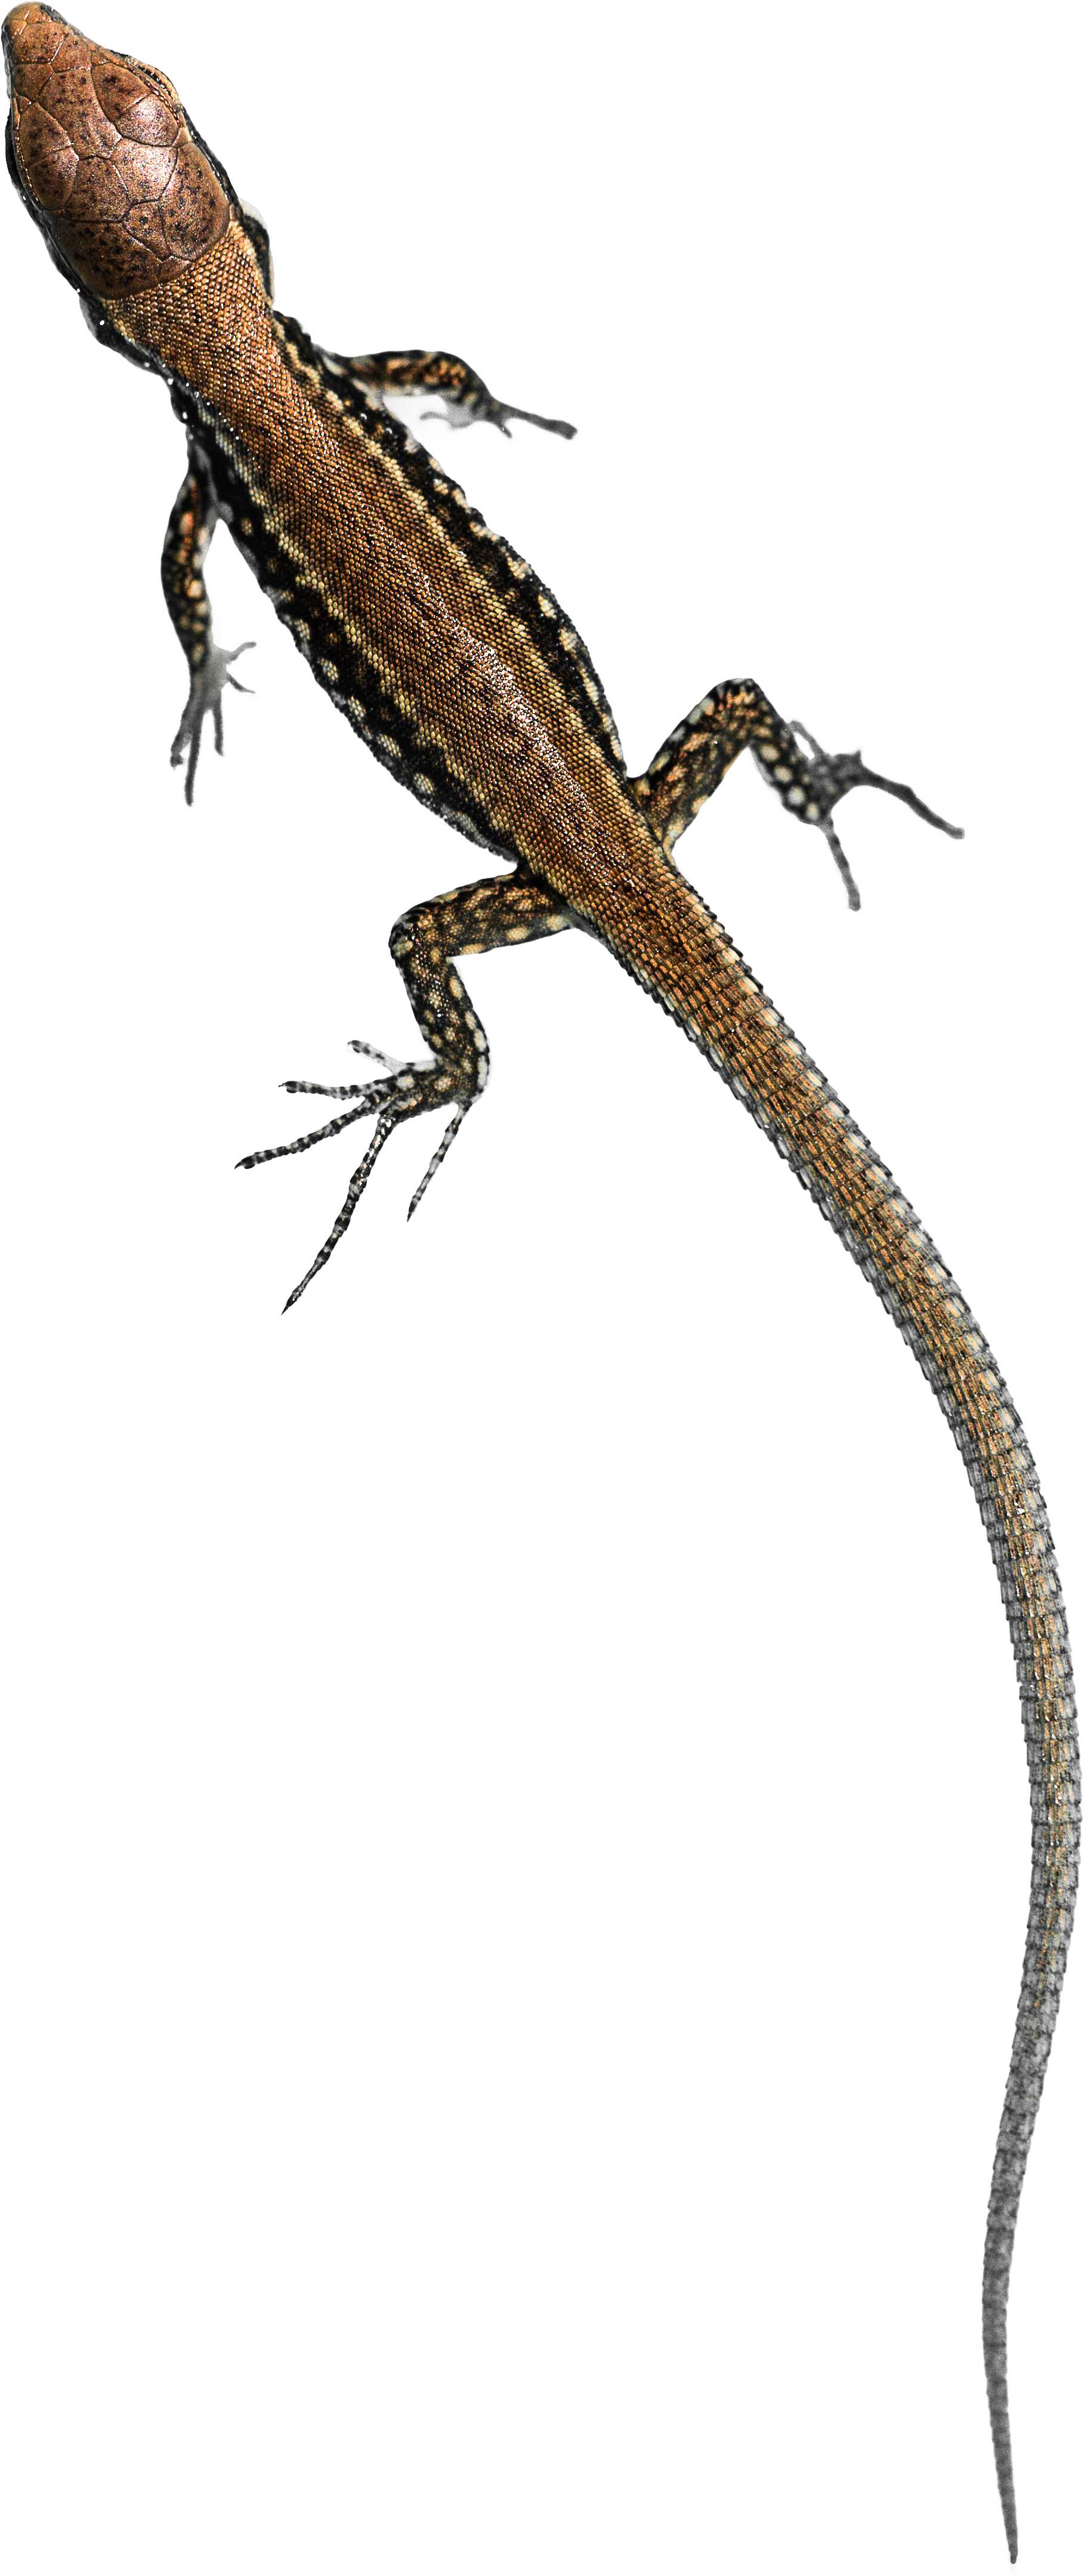 A Lizard With Long Tail And Long Legs